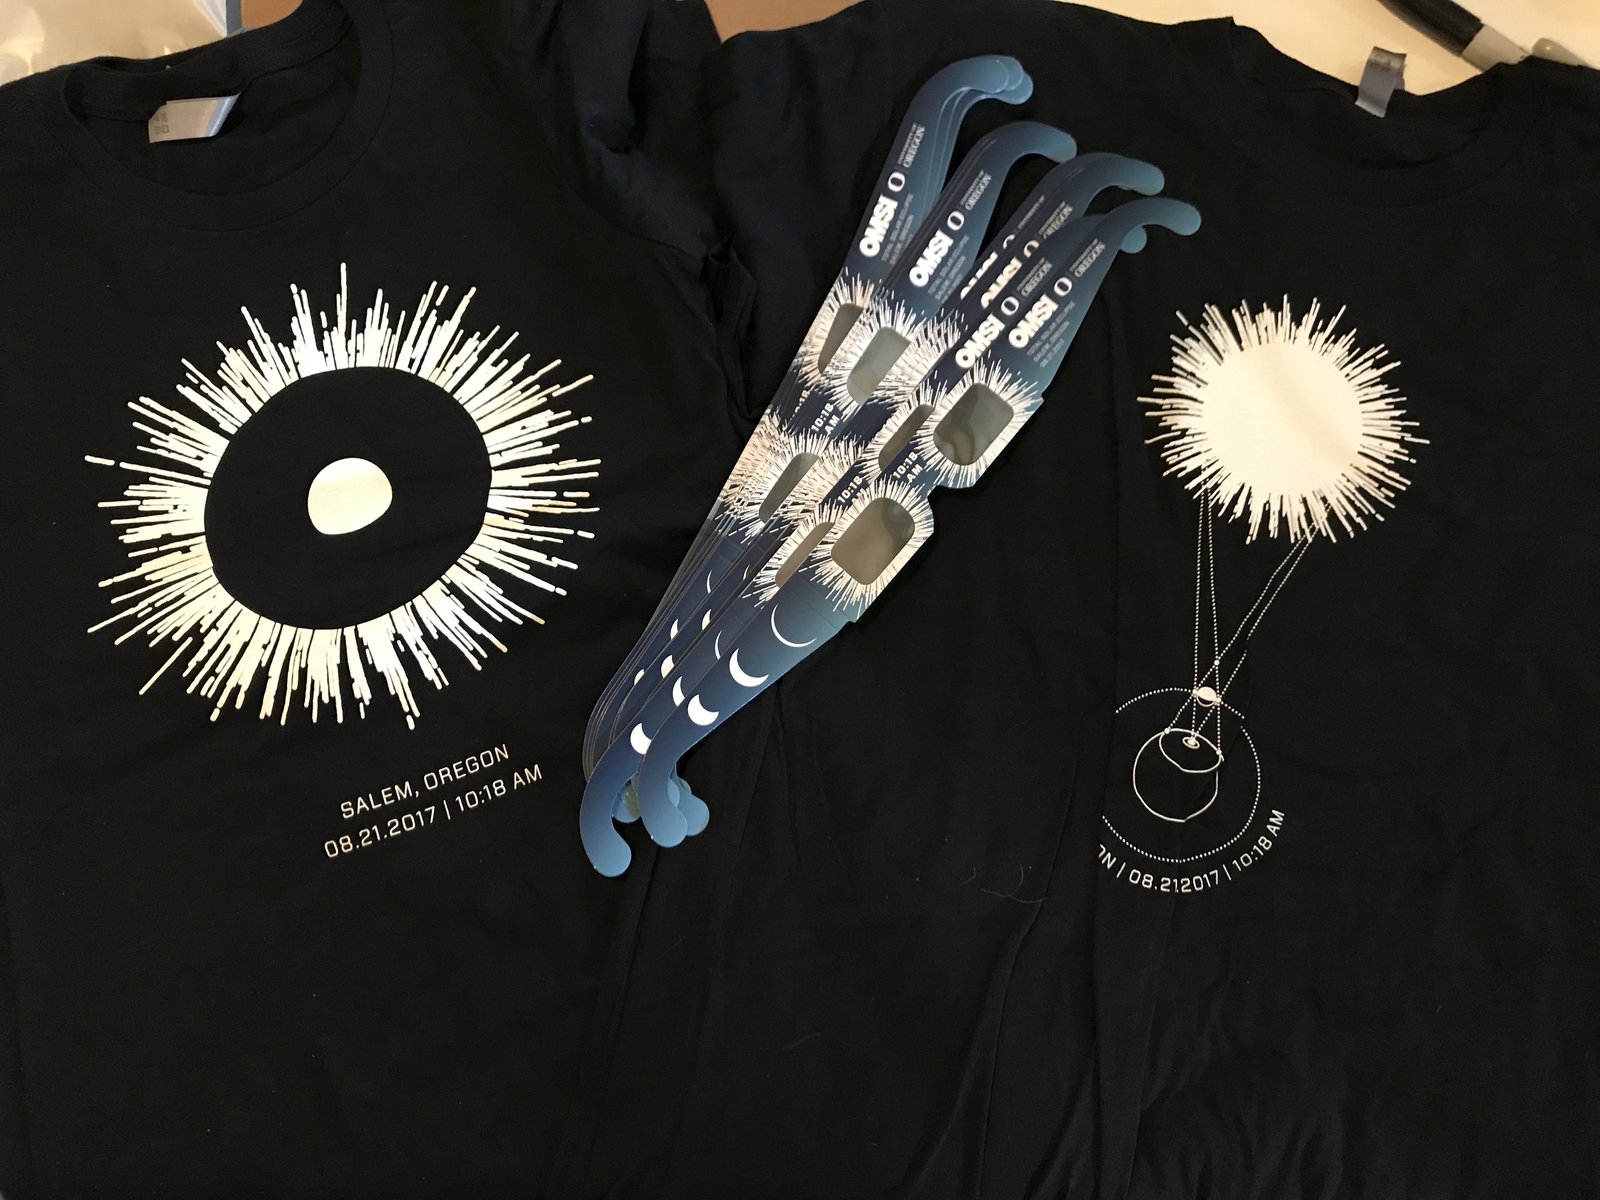 Exclusive OMSI Eclipse t-shirts and viewing glasses.